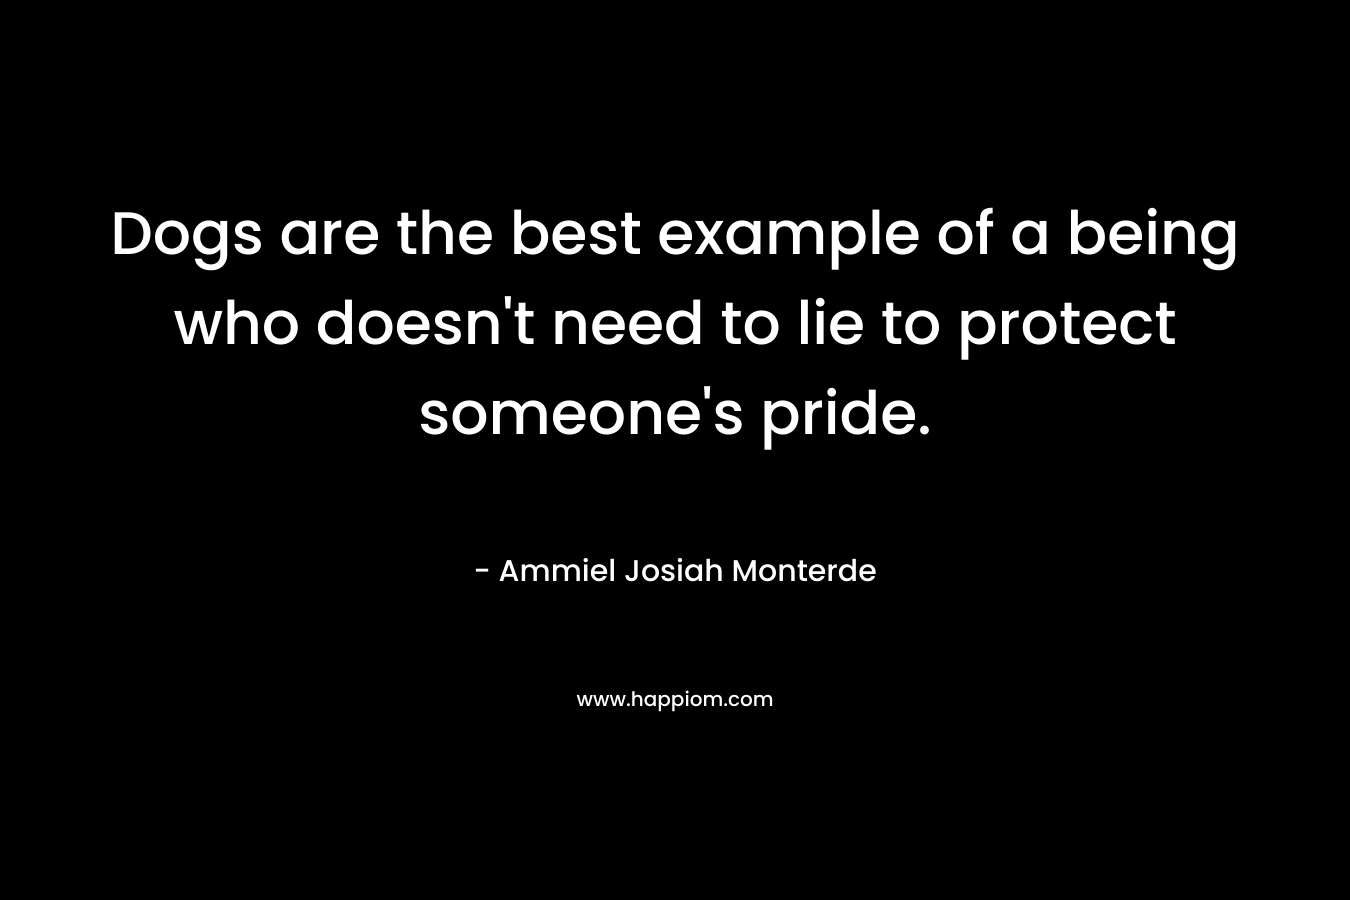 Dogs are the best example of a being who doesn’t need to lie to protect someone’s pride. – Ammiel Josiah Monterde